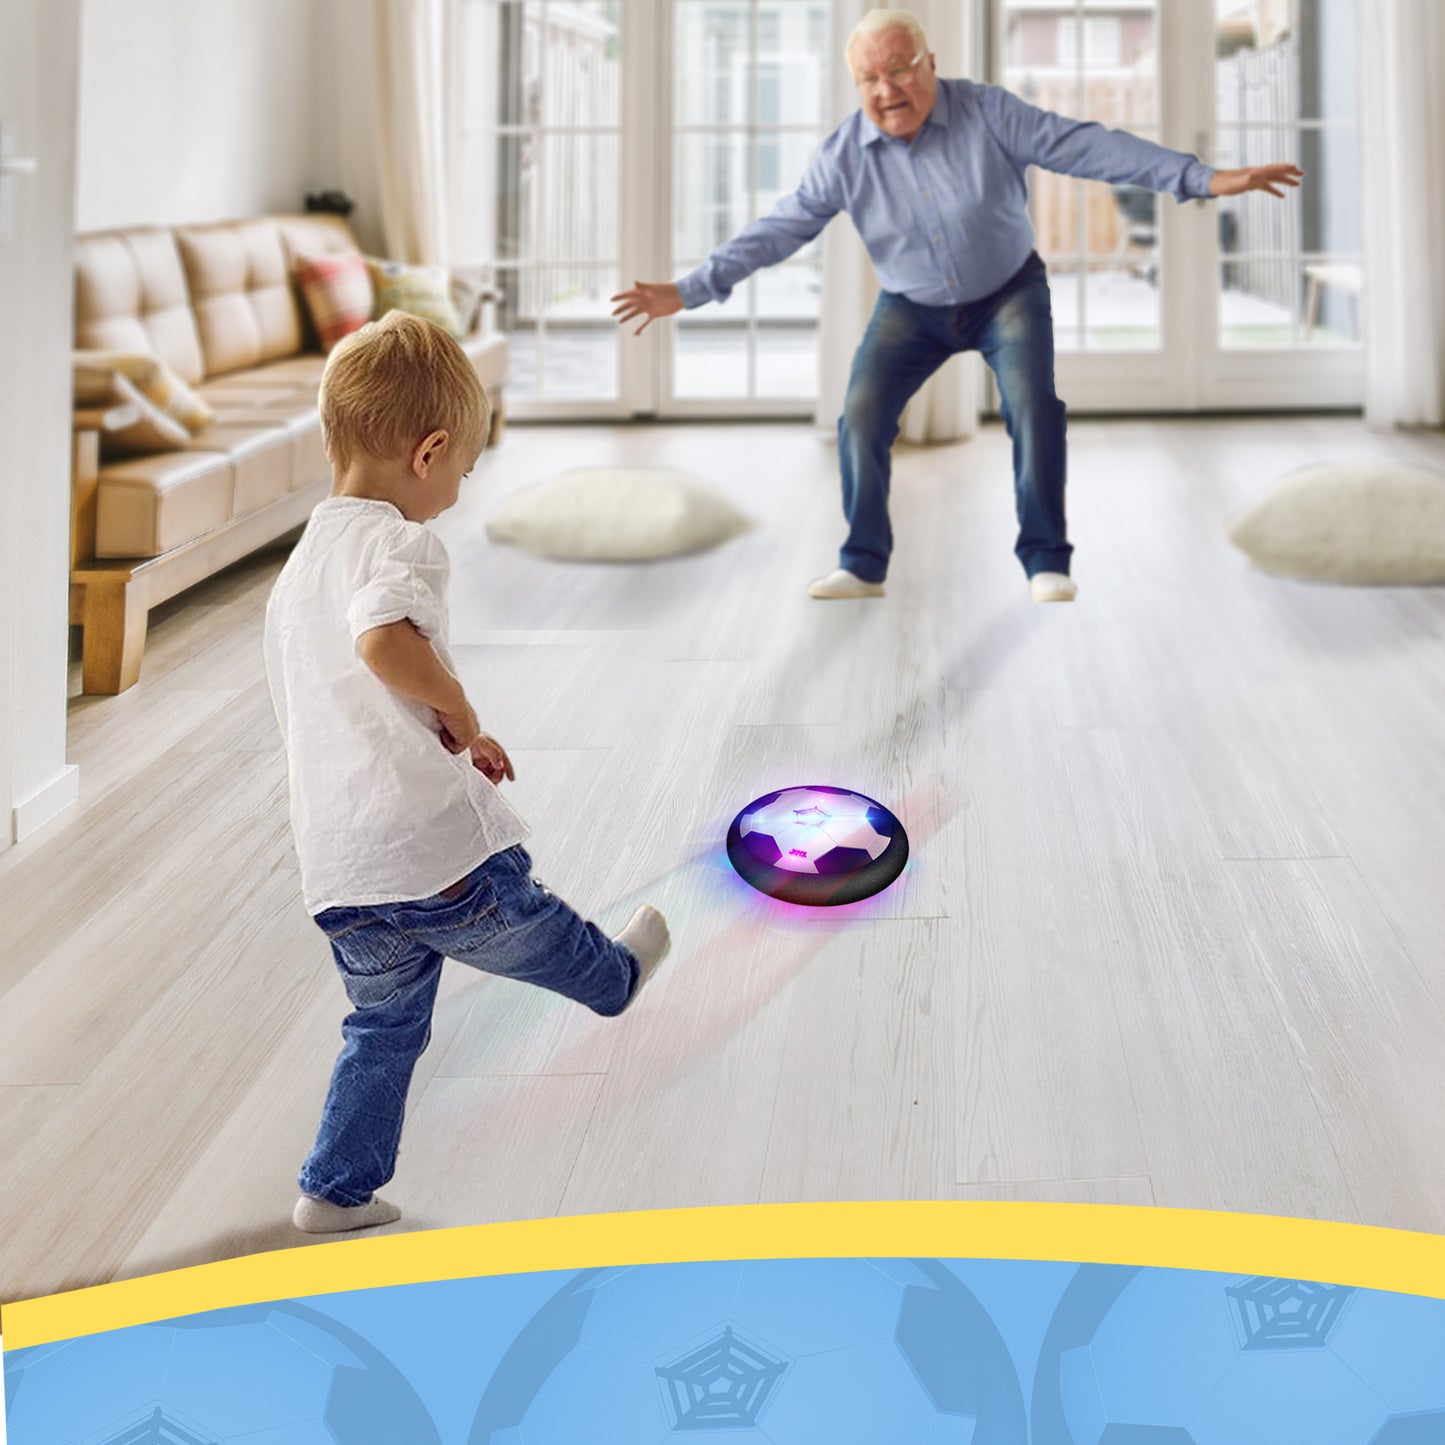 Hover soccer ball toy with lights